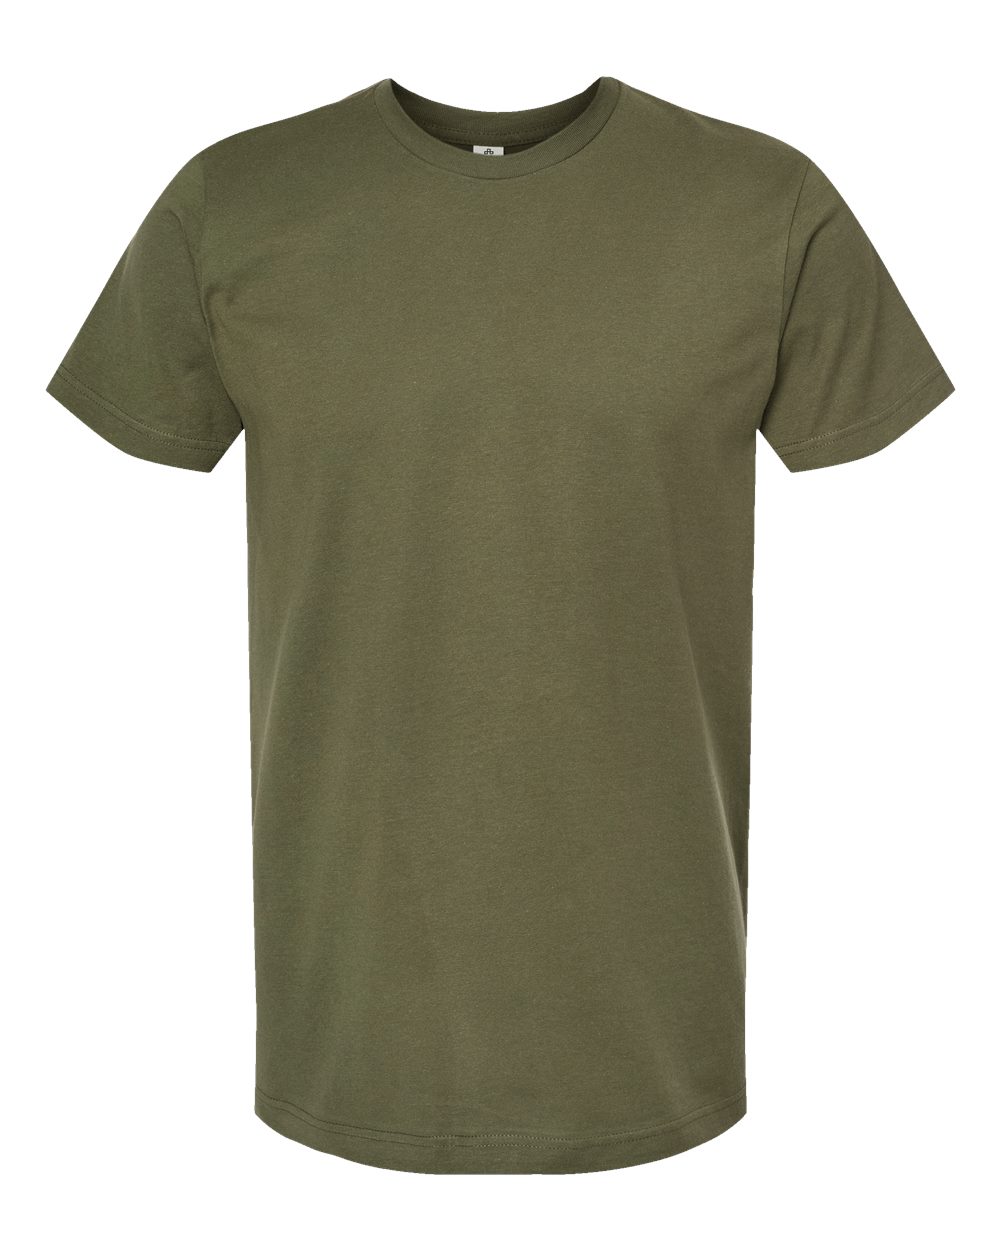 Tultex Unisex Tee (202) in Military Green